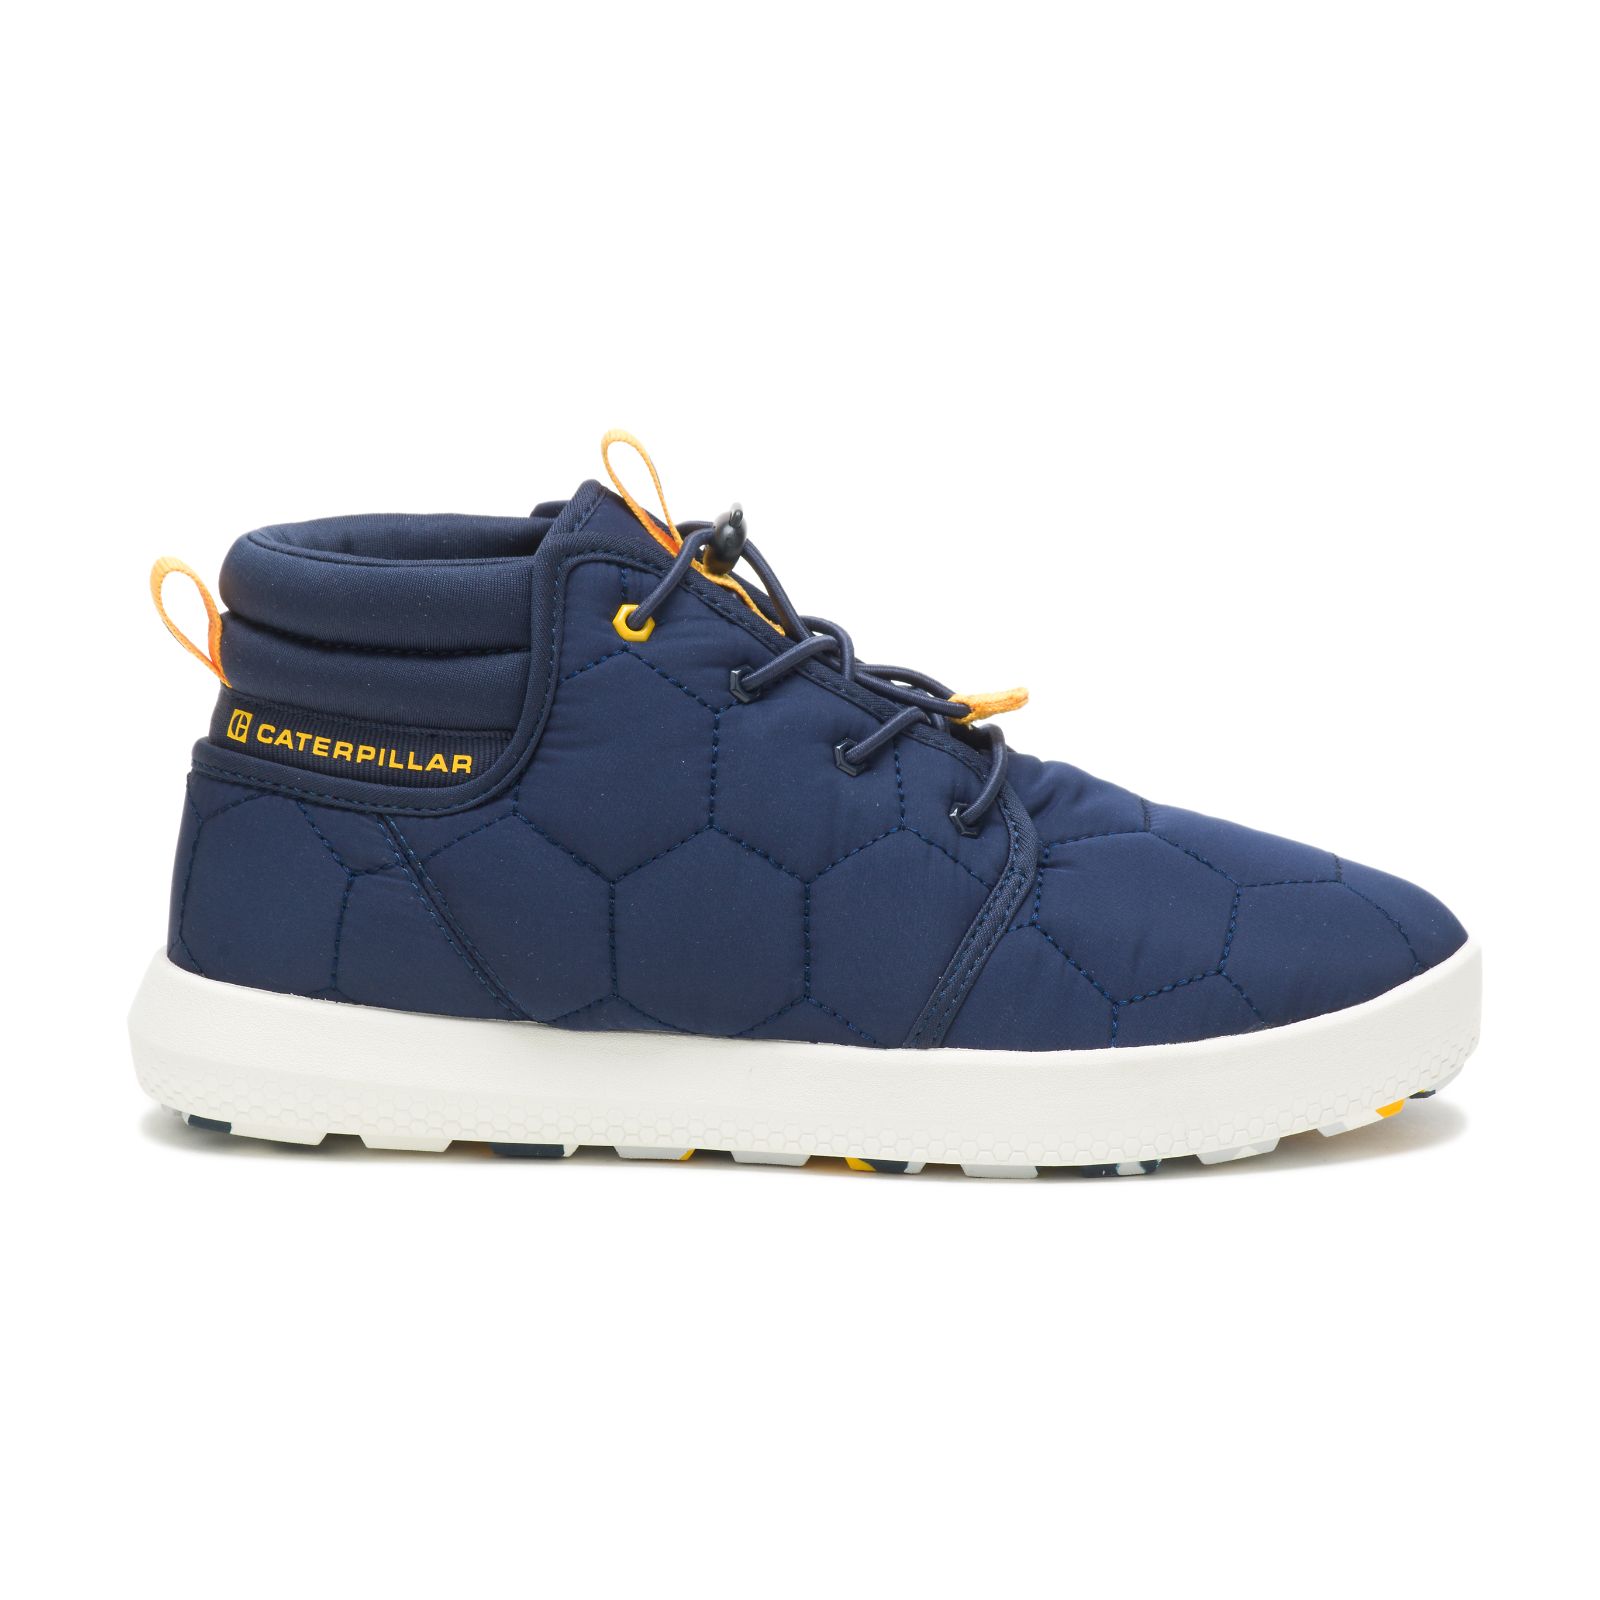 Caterpillar Sneakers Online UAE - Caterpillar Code Scout Mid Womens - Blue FNYRKW096